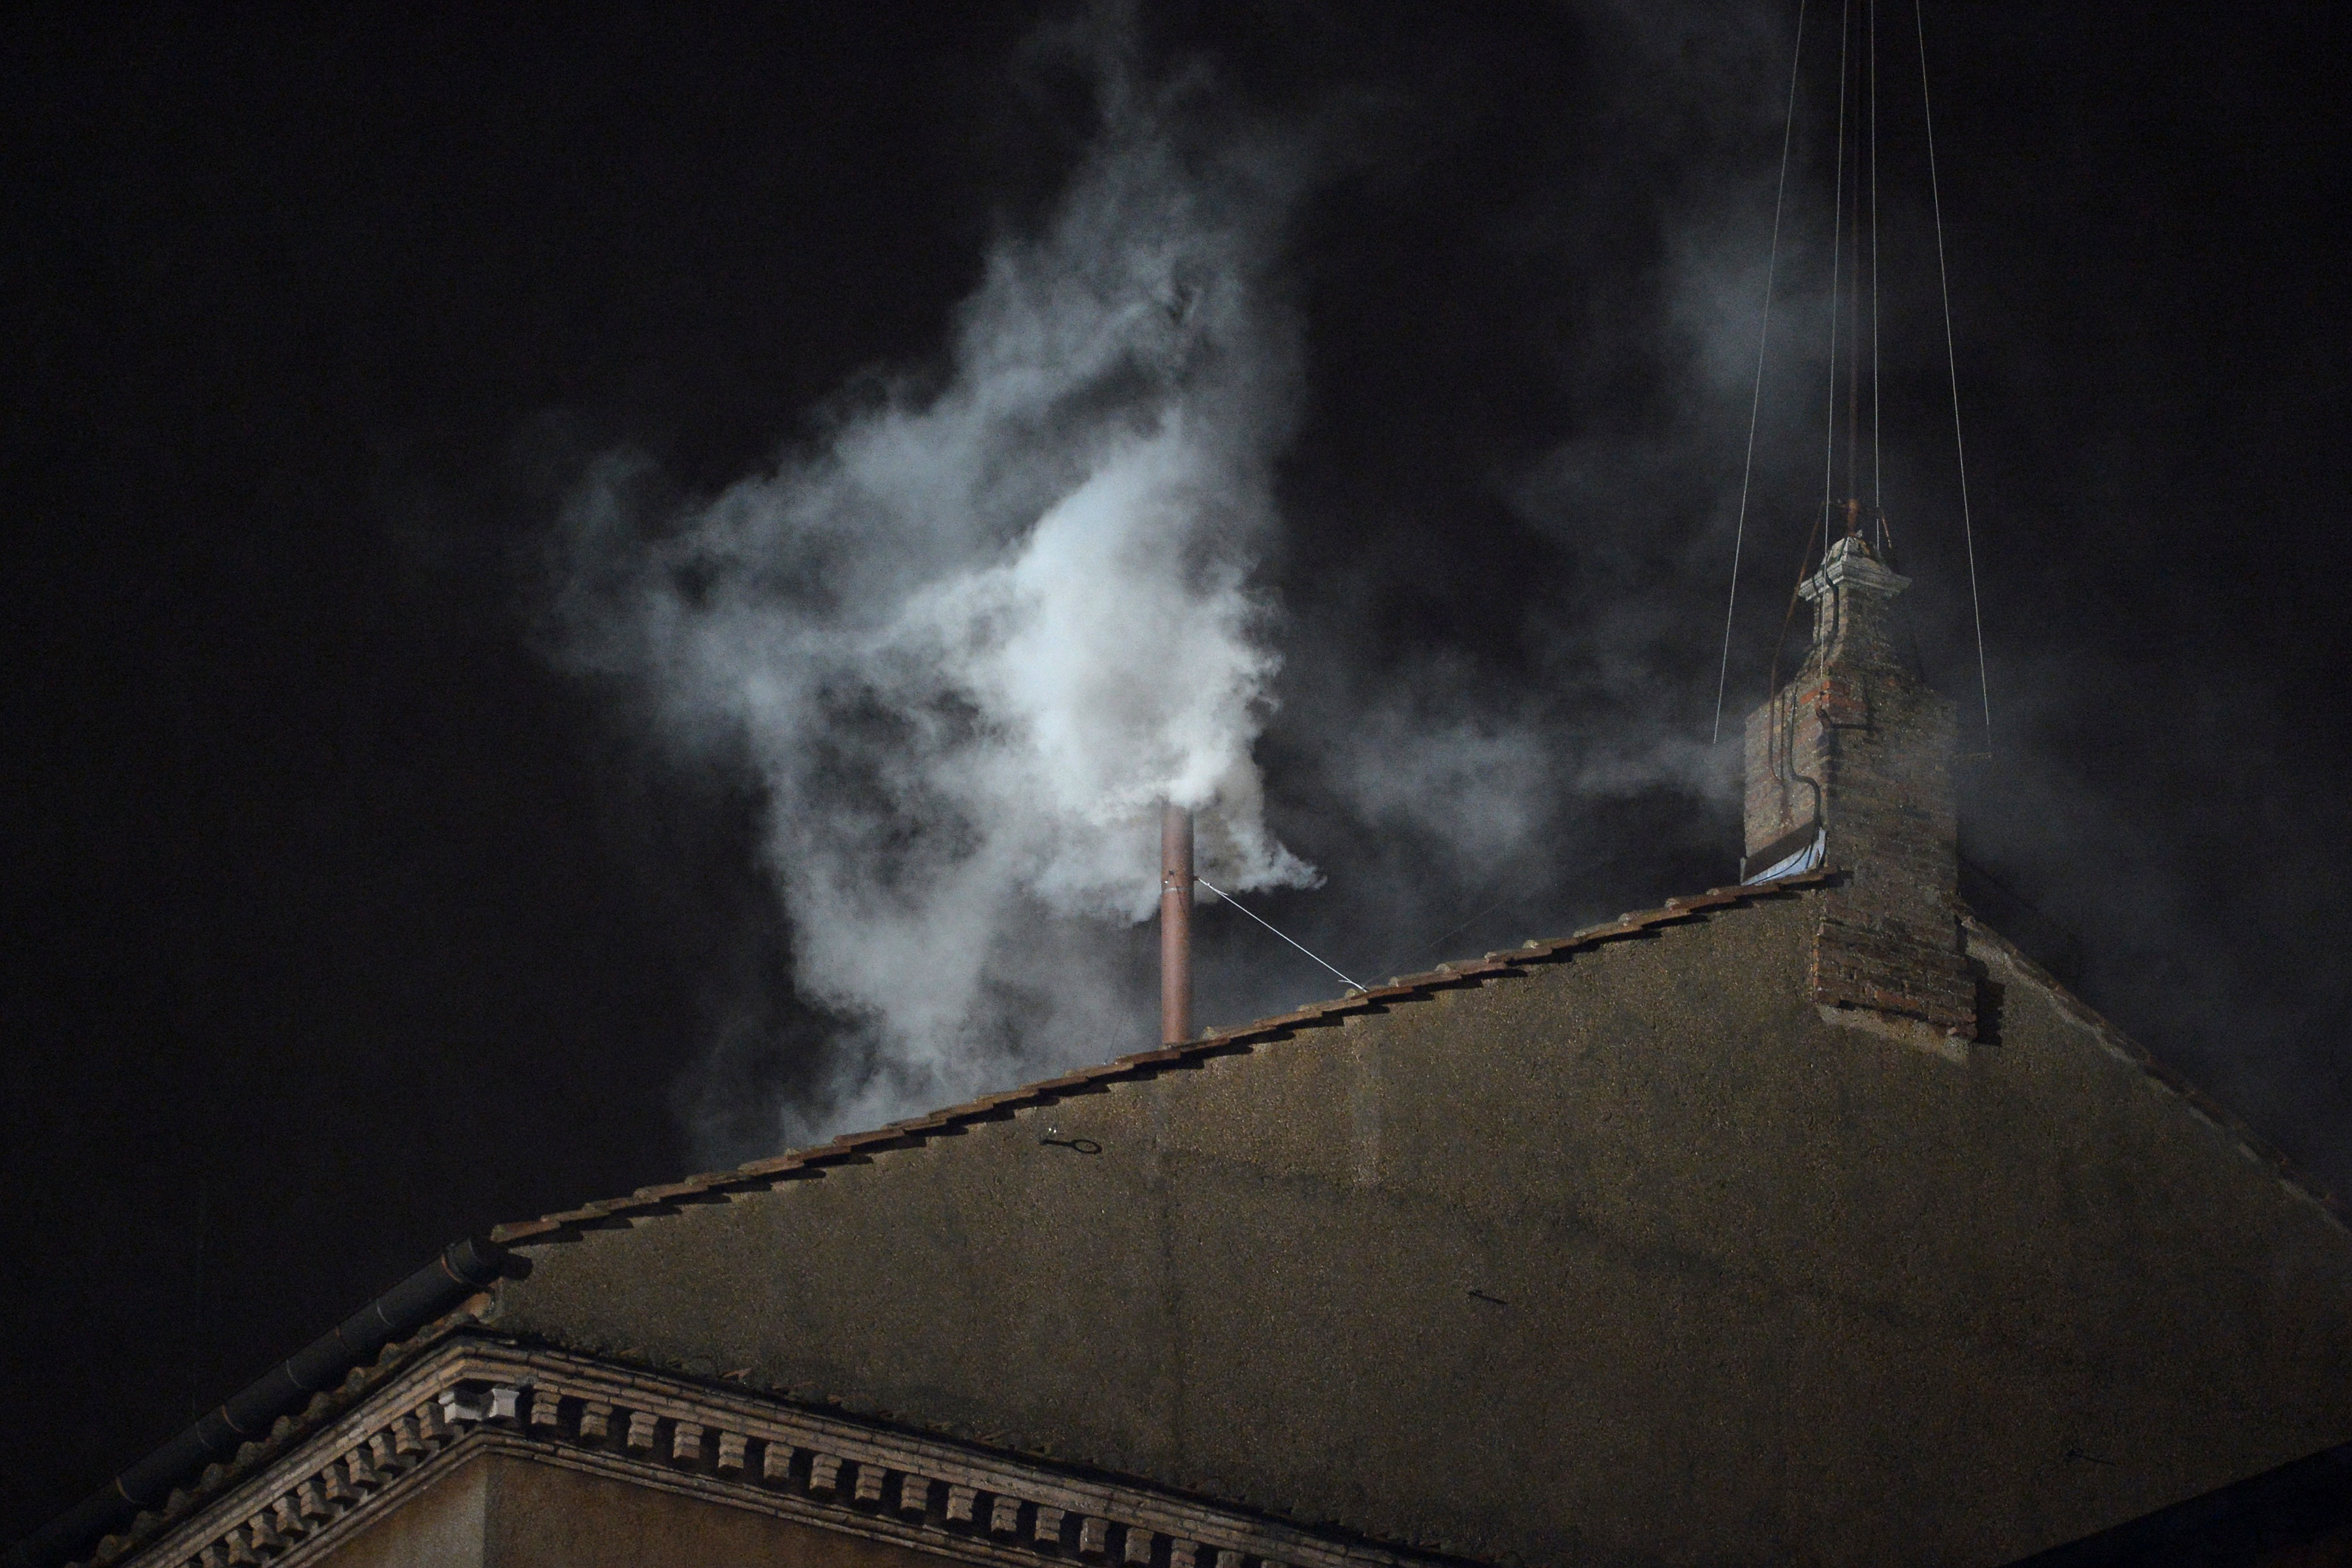 White smoke rises from the chimney on the roof of the Sistine Chapel meaning that cardinals elected a new pope on the second day of their secret conclave on March 13, 2013 at the Vatican. (credit: ALBERTO PIZZOLI/AFP/Getty Images)